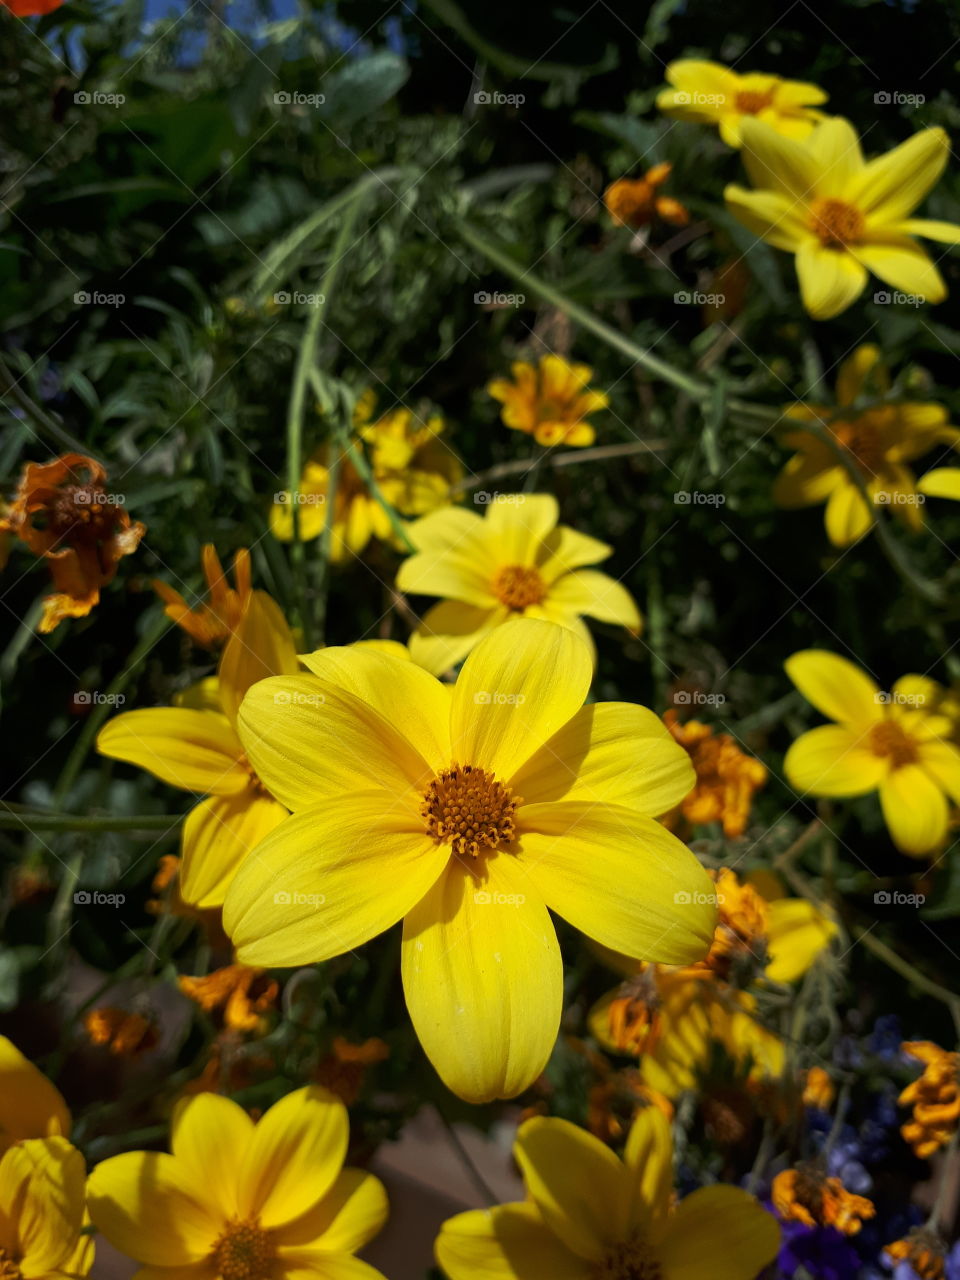 Yellow flower against smaller flowers and foliage